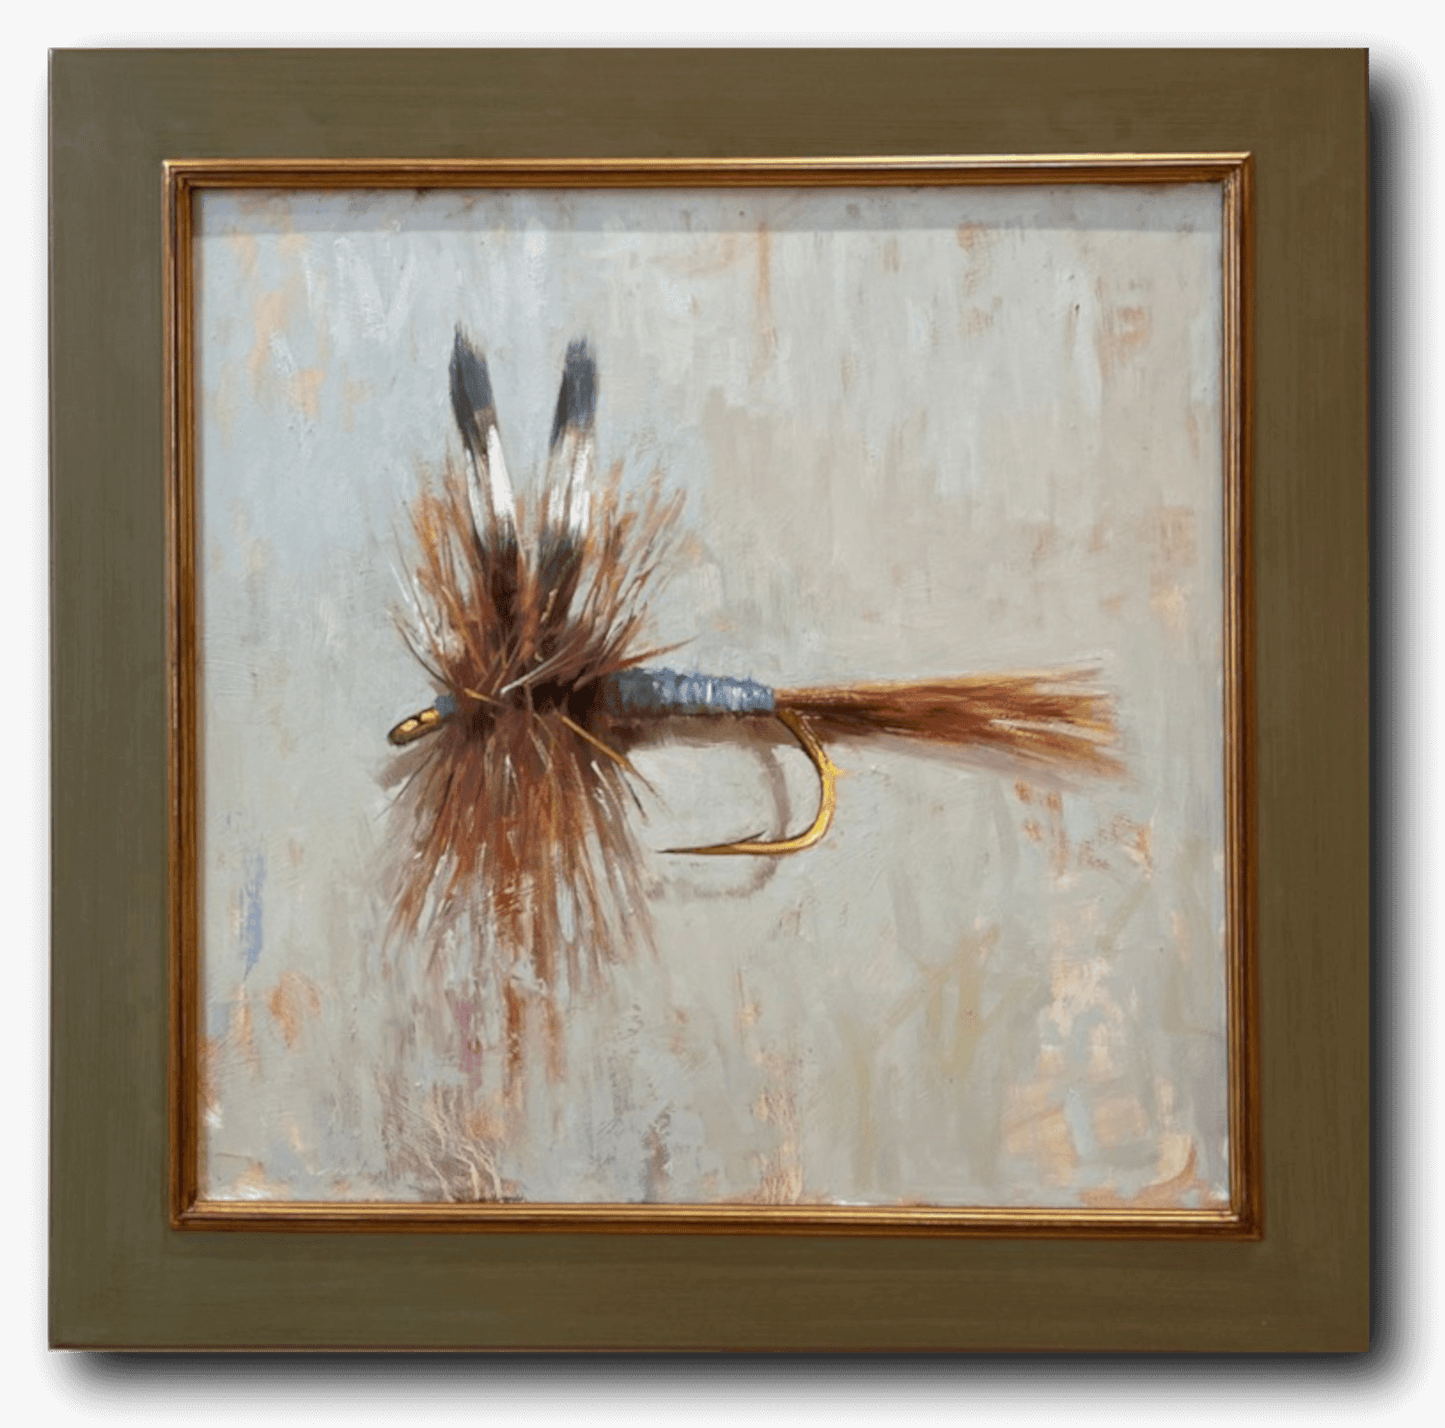 Adams Fly by Marc Anderson at LePrince Galleries